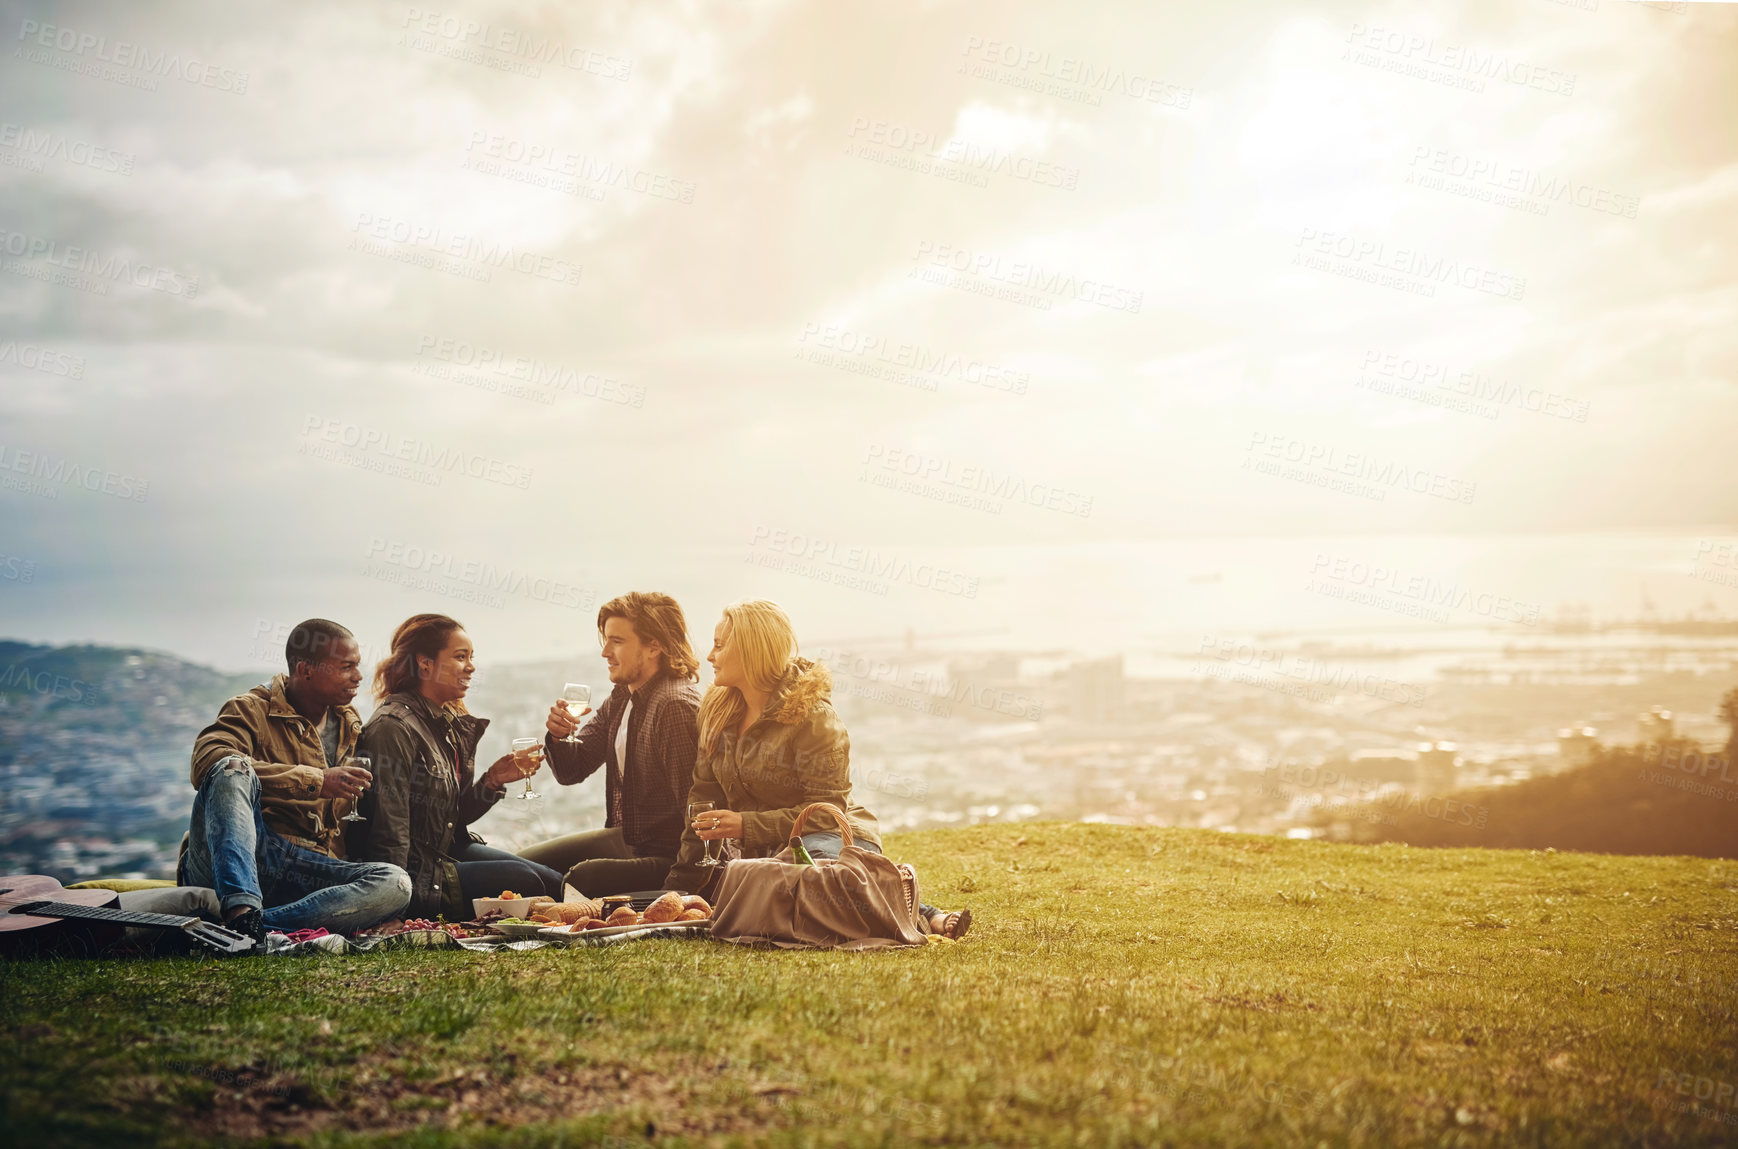 Buy stock photo Shot of a group of young friends having fun at a picnic